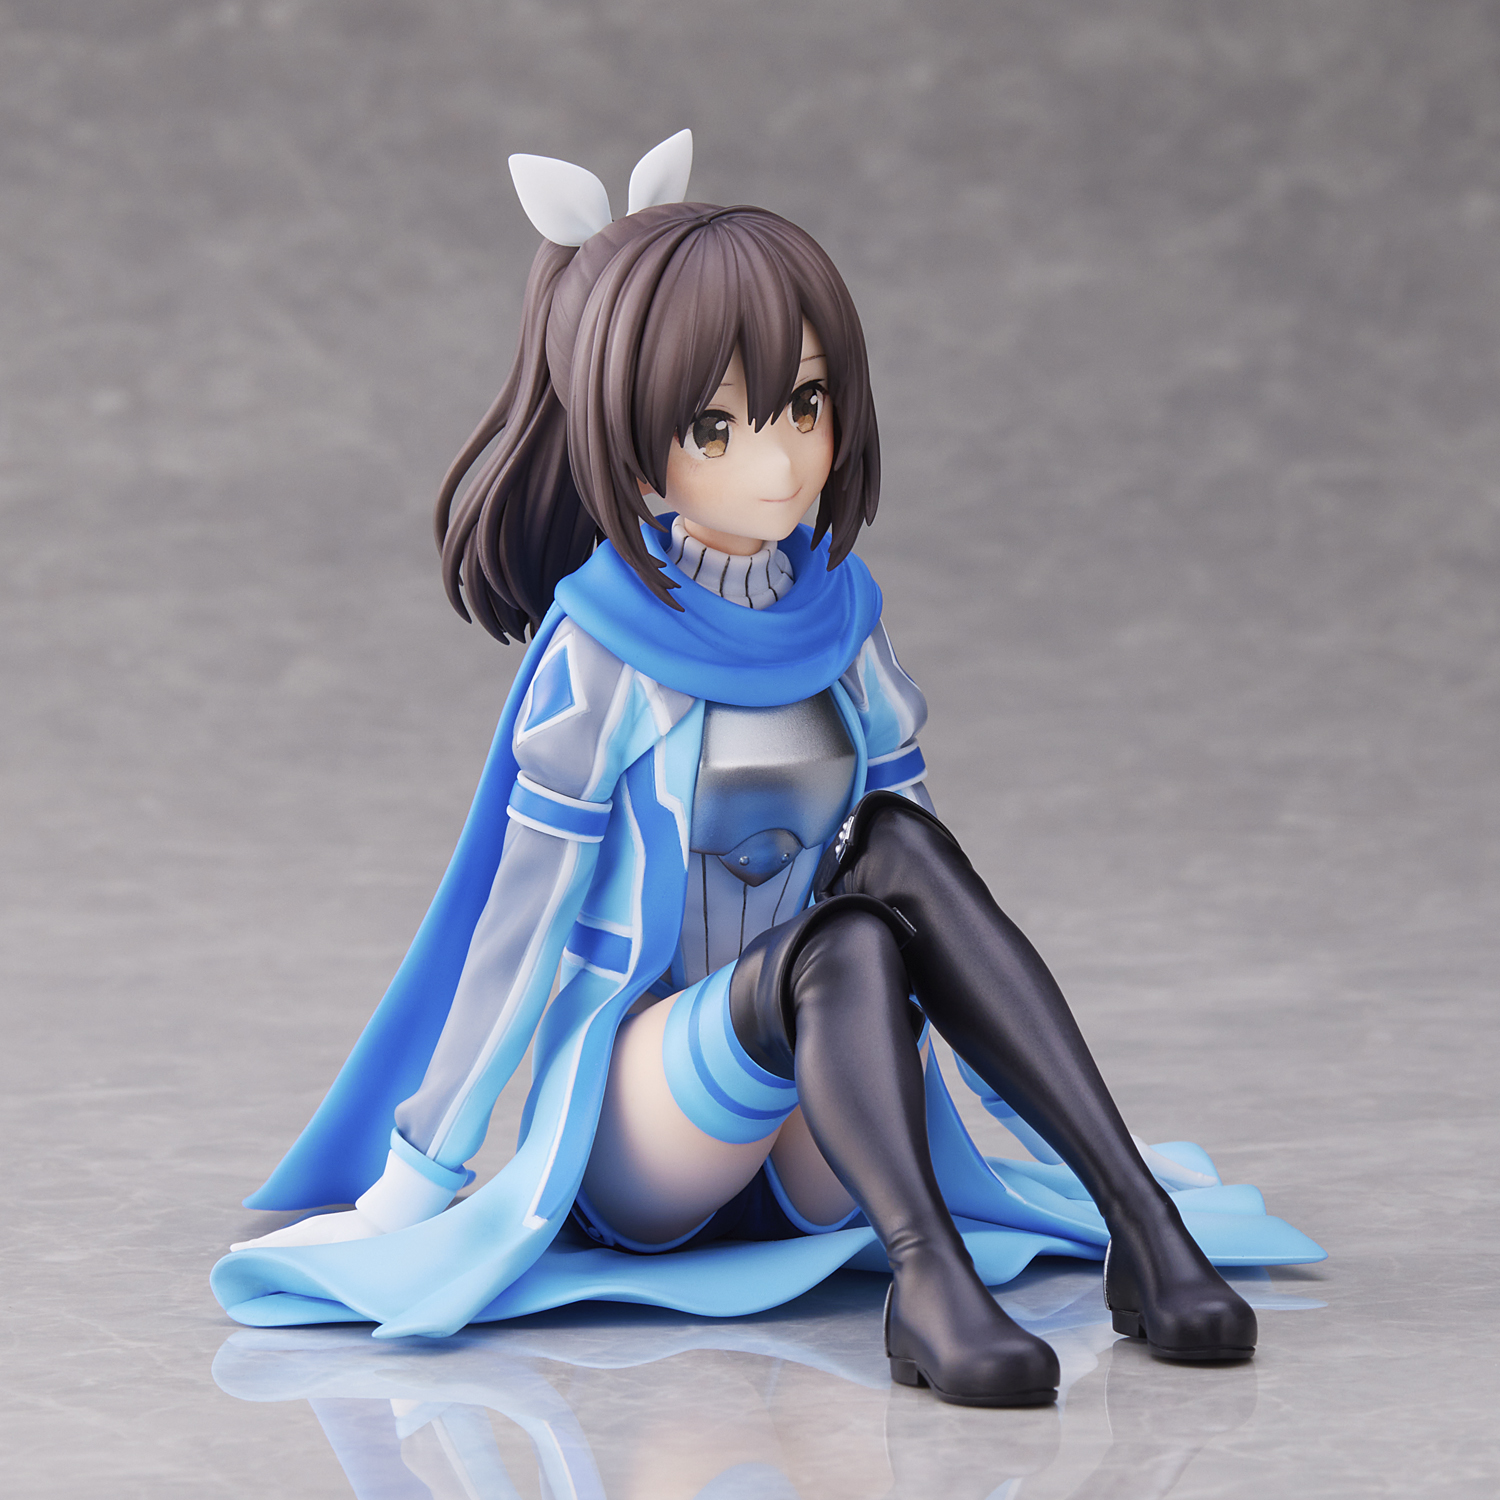 Figurine BOFURI: I Don't Want to Get Hurt, so I'll Max Out My Defense - Sally - Union Creative